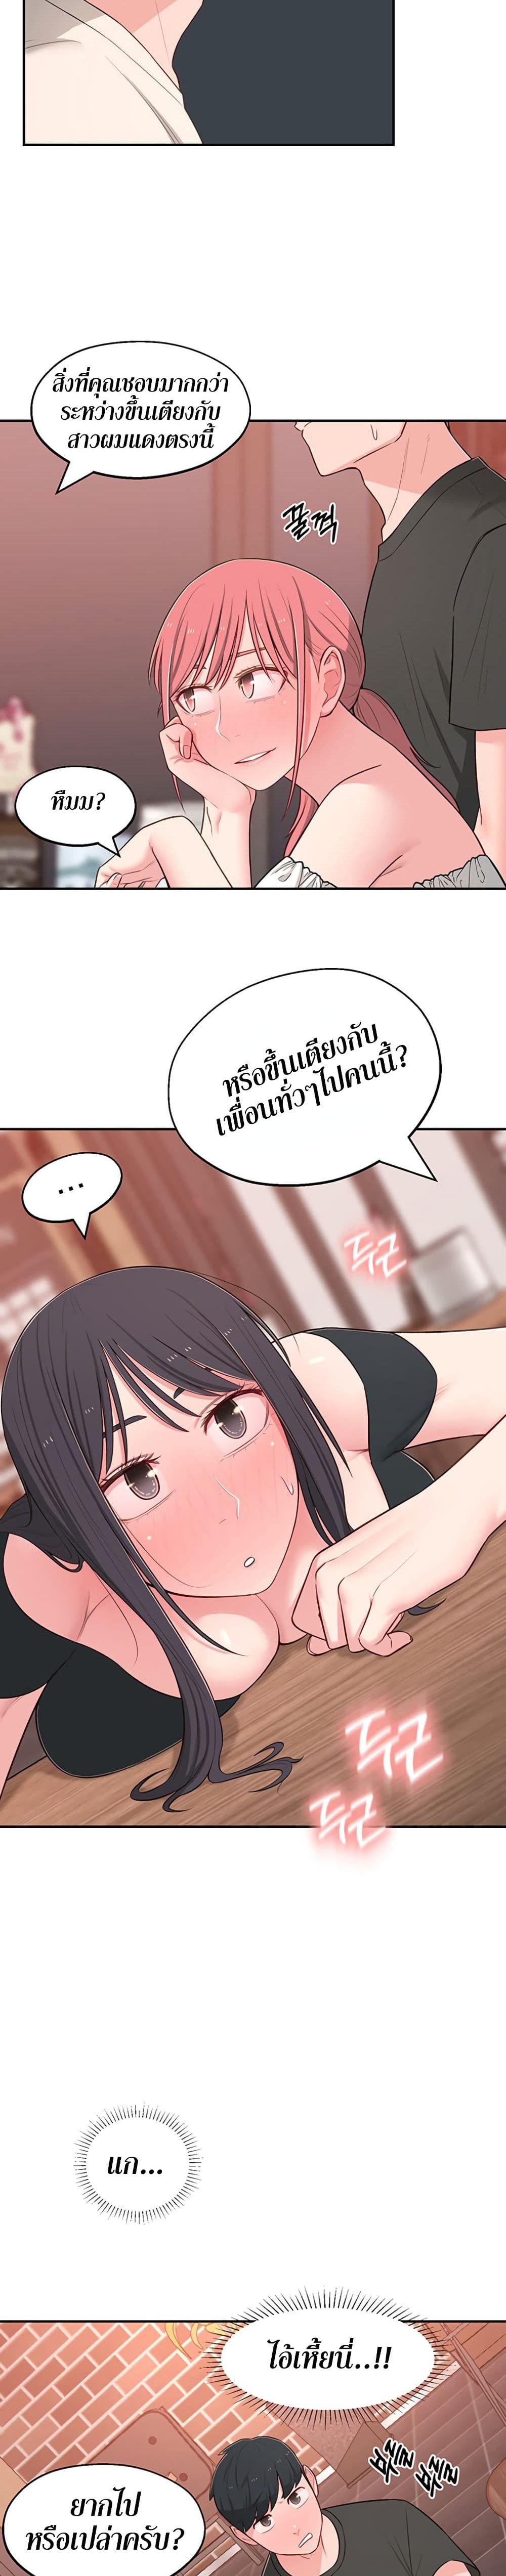 A Knowing Sister 13 ภาพ 23